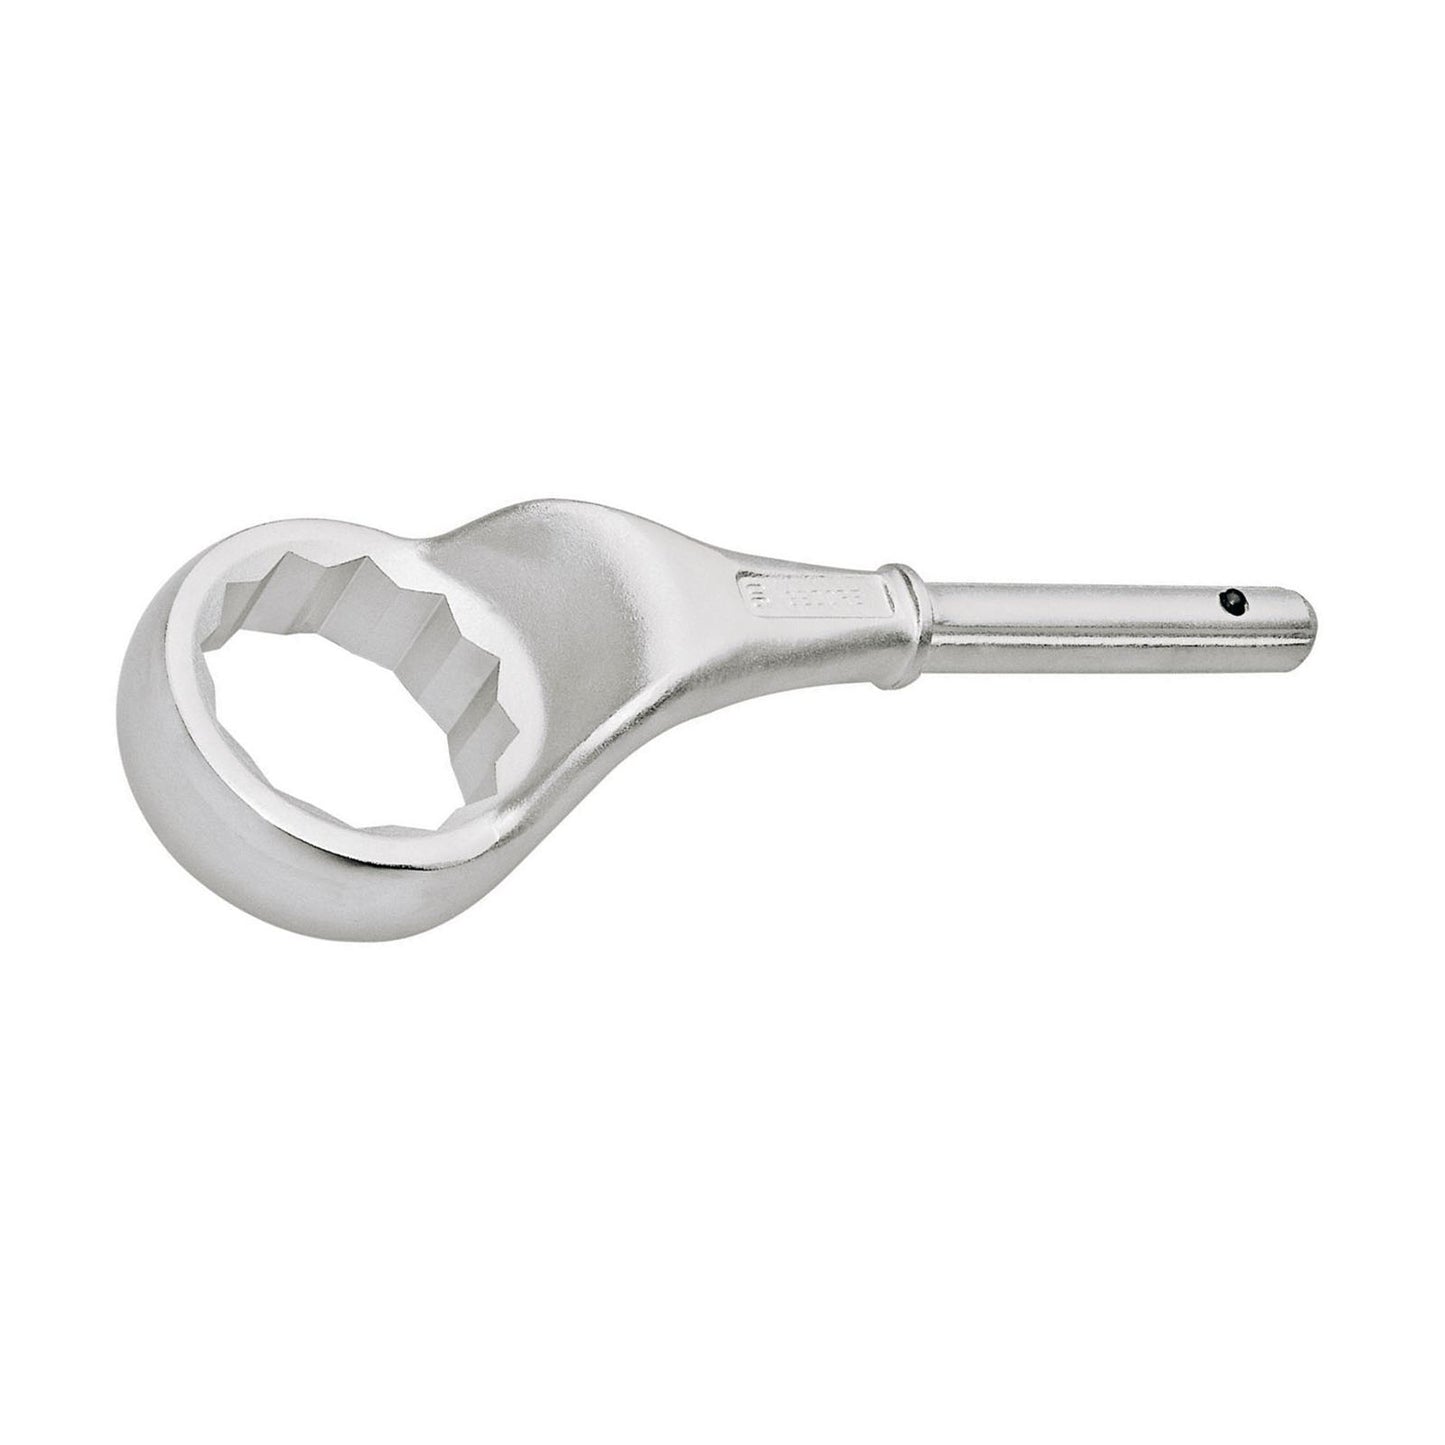 GEDORE 2 A 50 - Traction Wrench, 50mm (6034570)